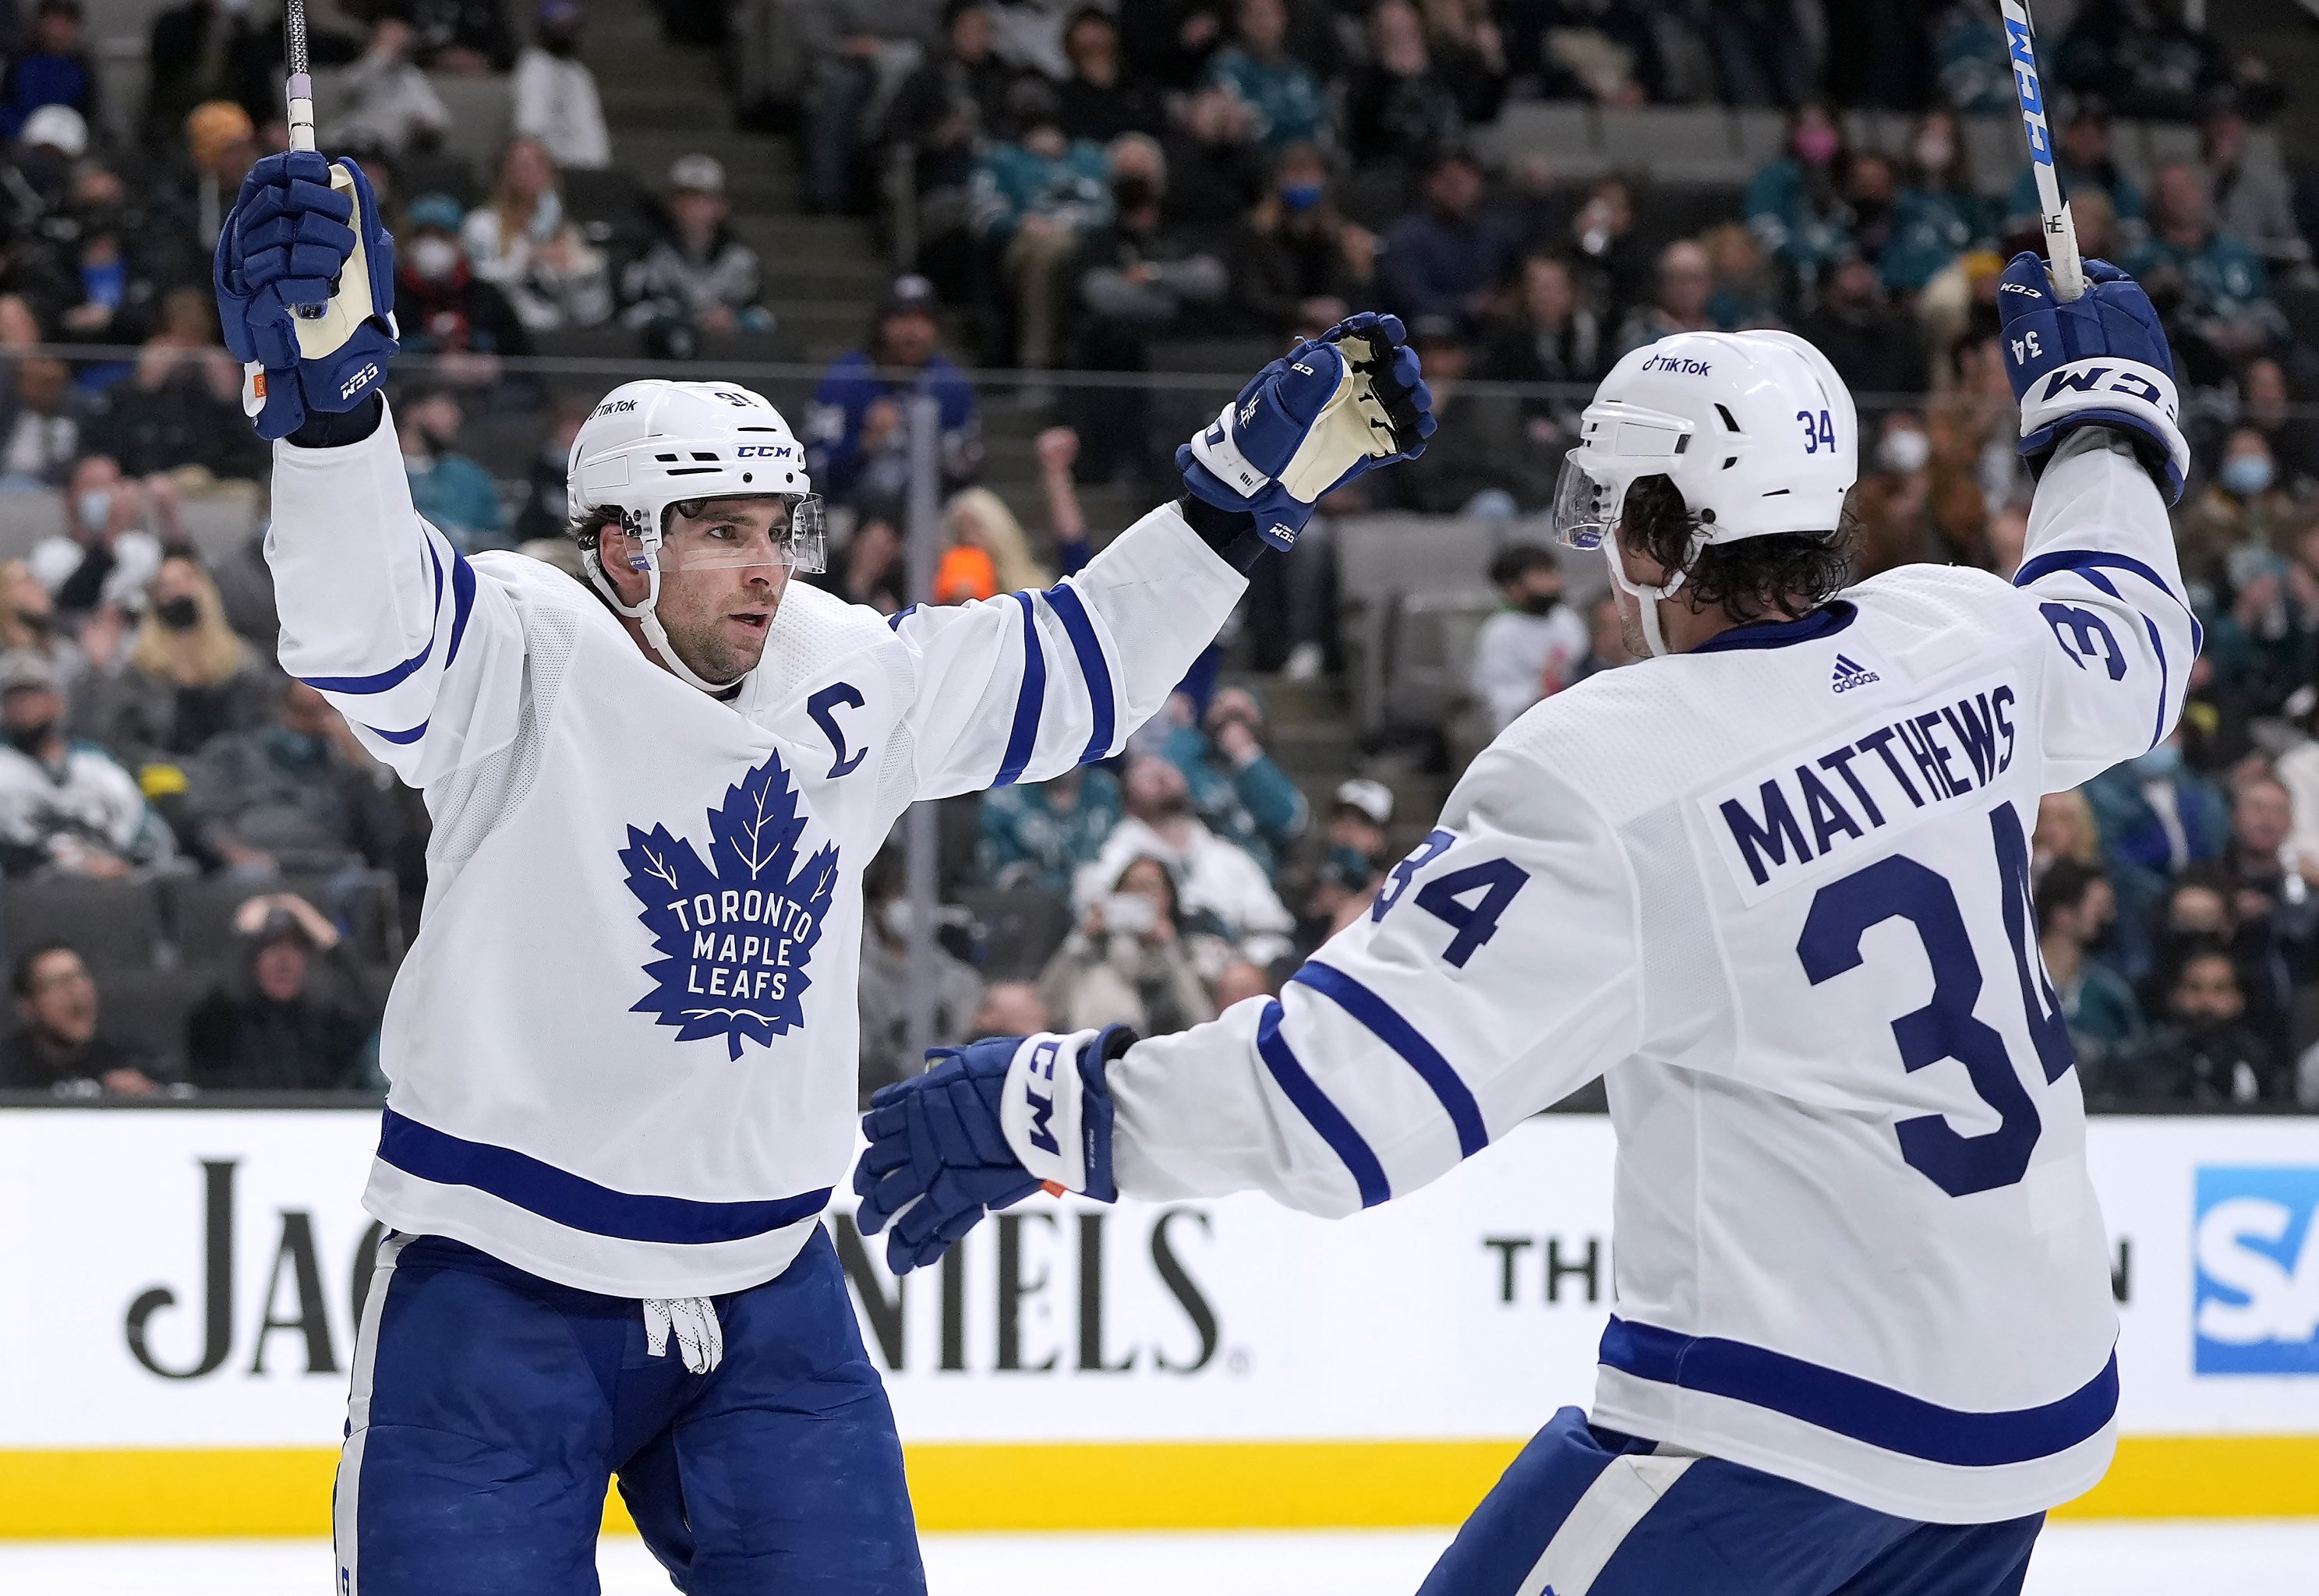 Devils' 13-game win streak halted in 2-1 loss to Maple Leafs